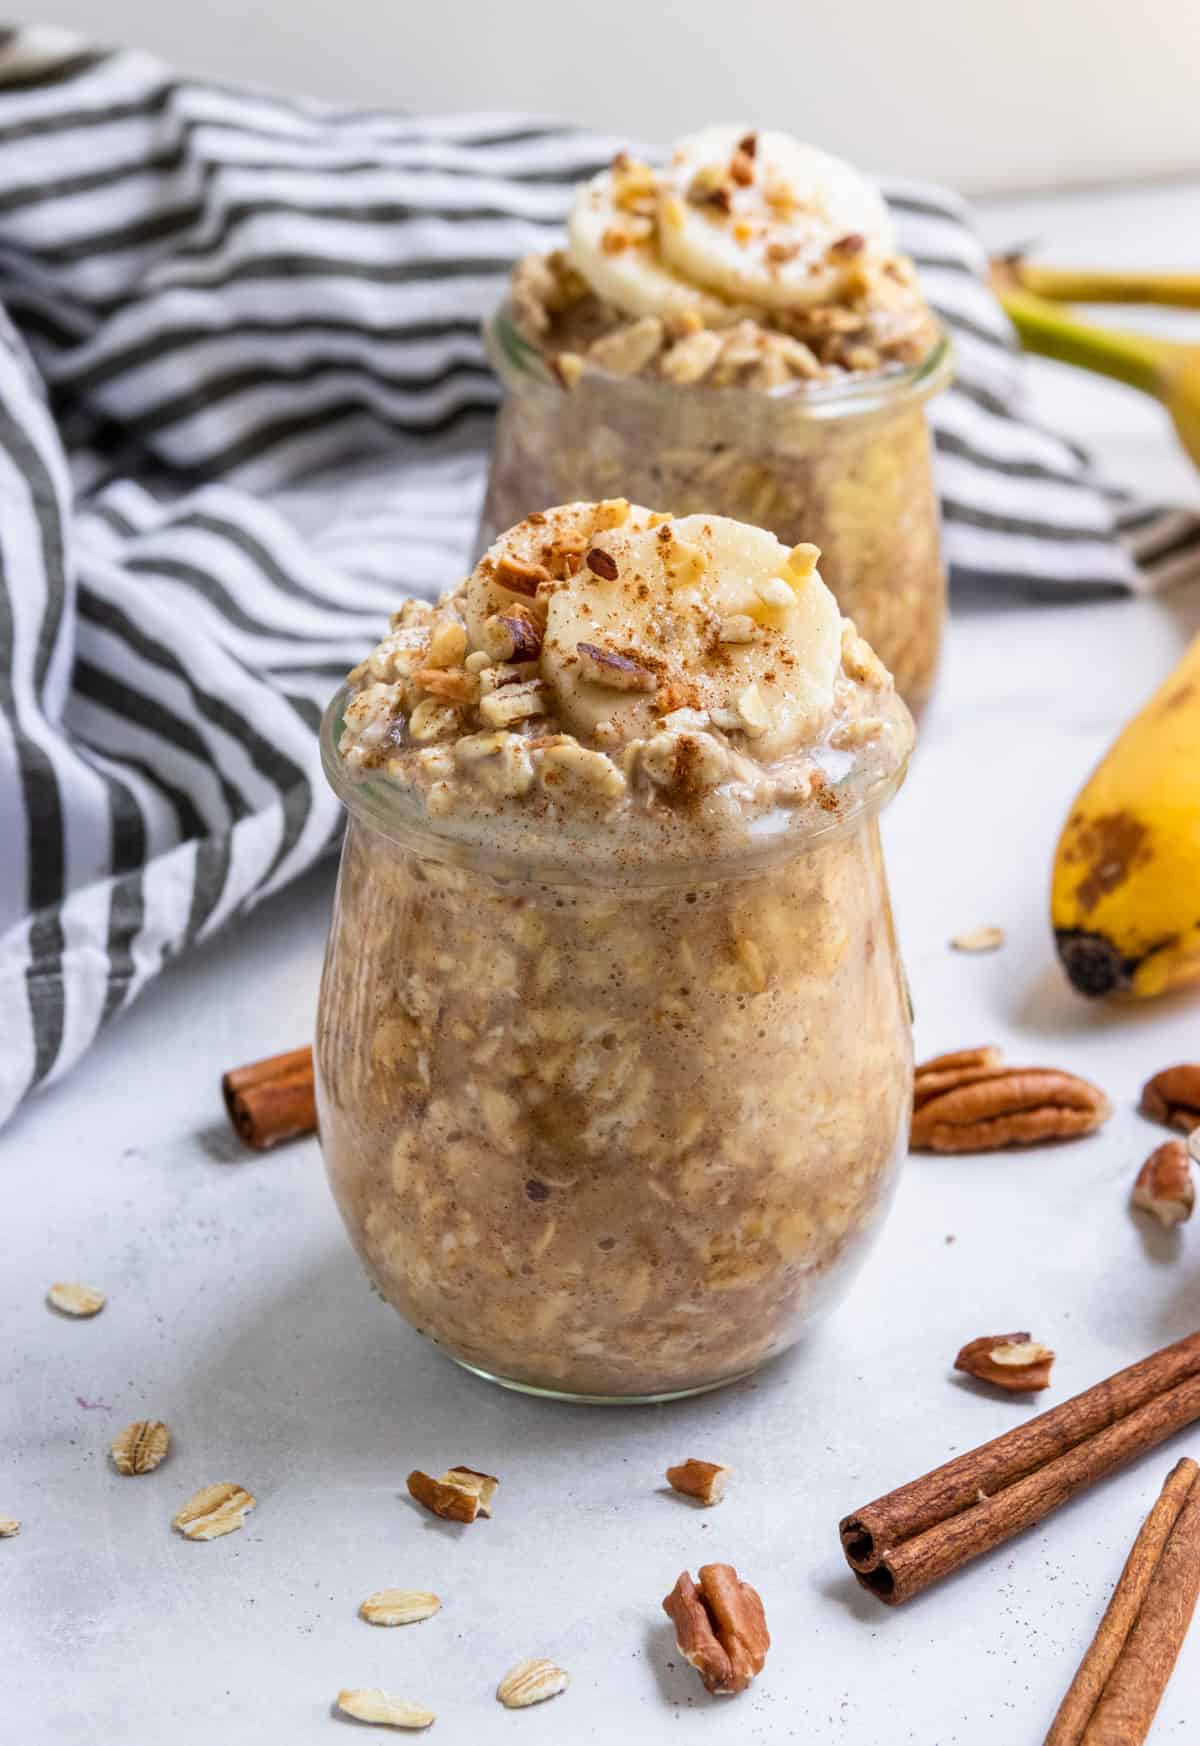 Oatmeal in glass jars with banana slices and pecans.